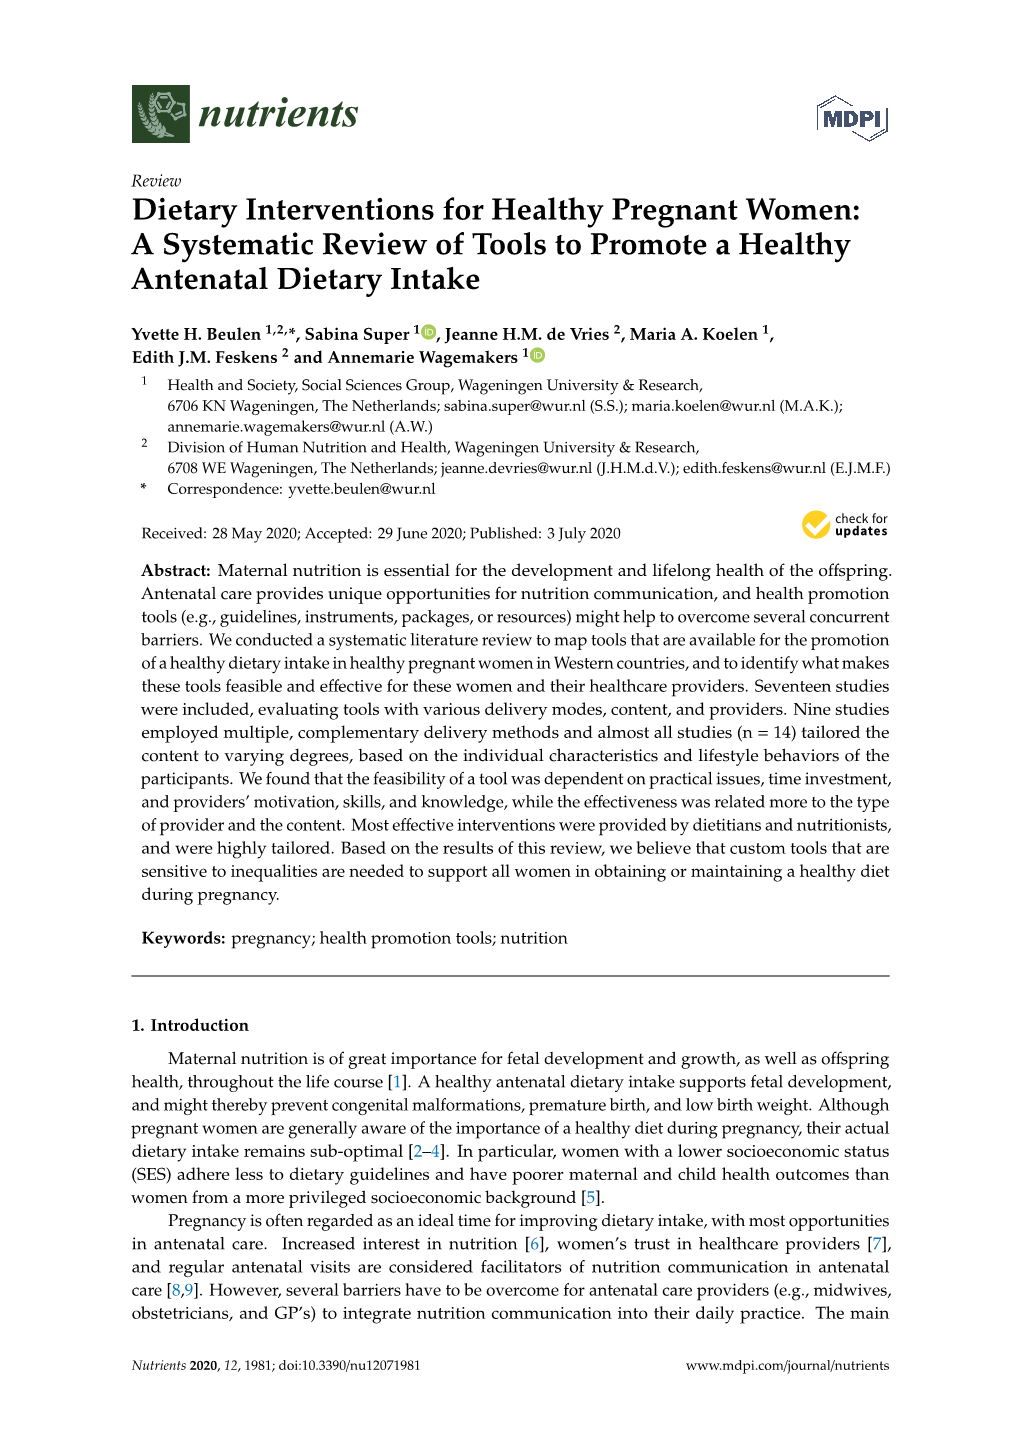 Dietary Interventions for Healthy Pregnant Women: a Systematic Review of Tools to Promote a Healthy Antenatal Dietary Intake